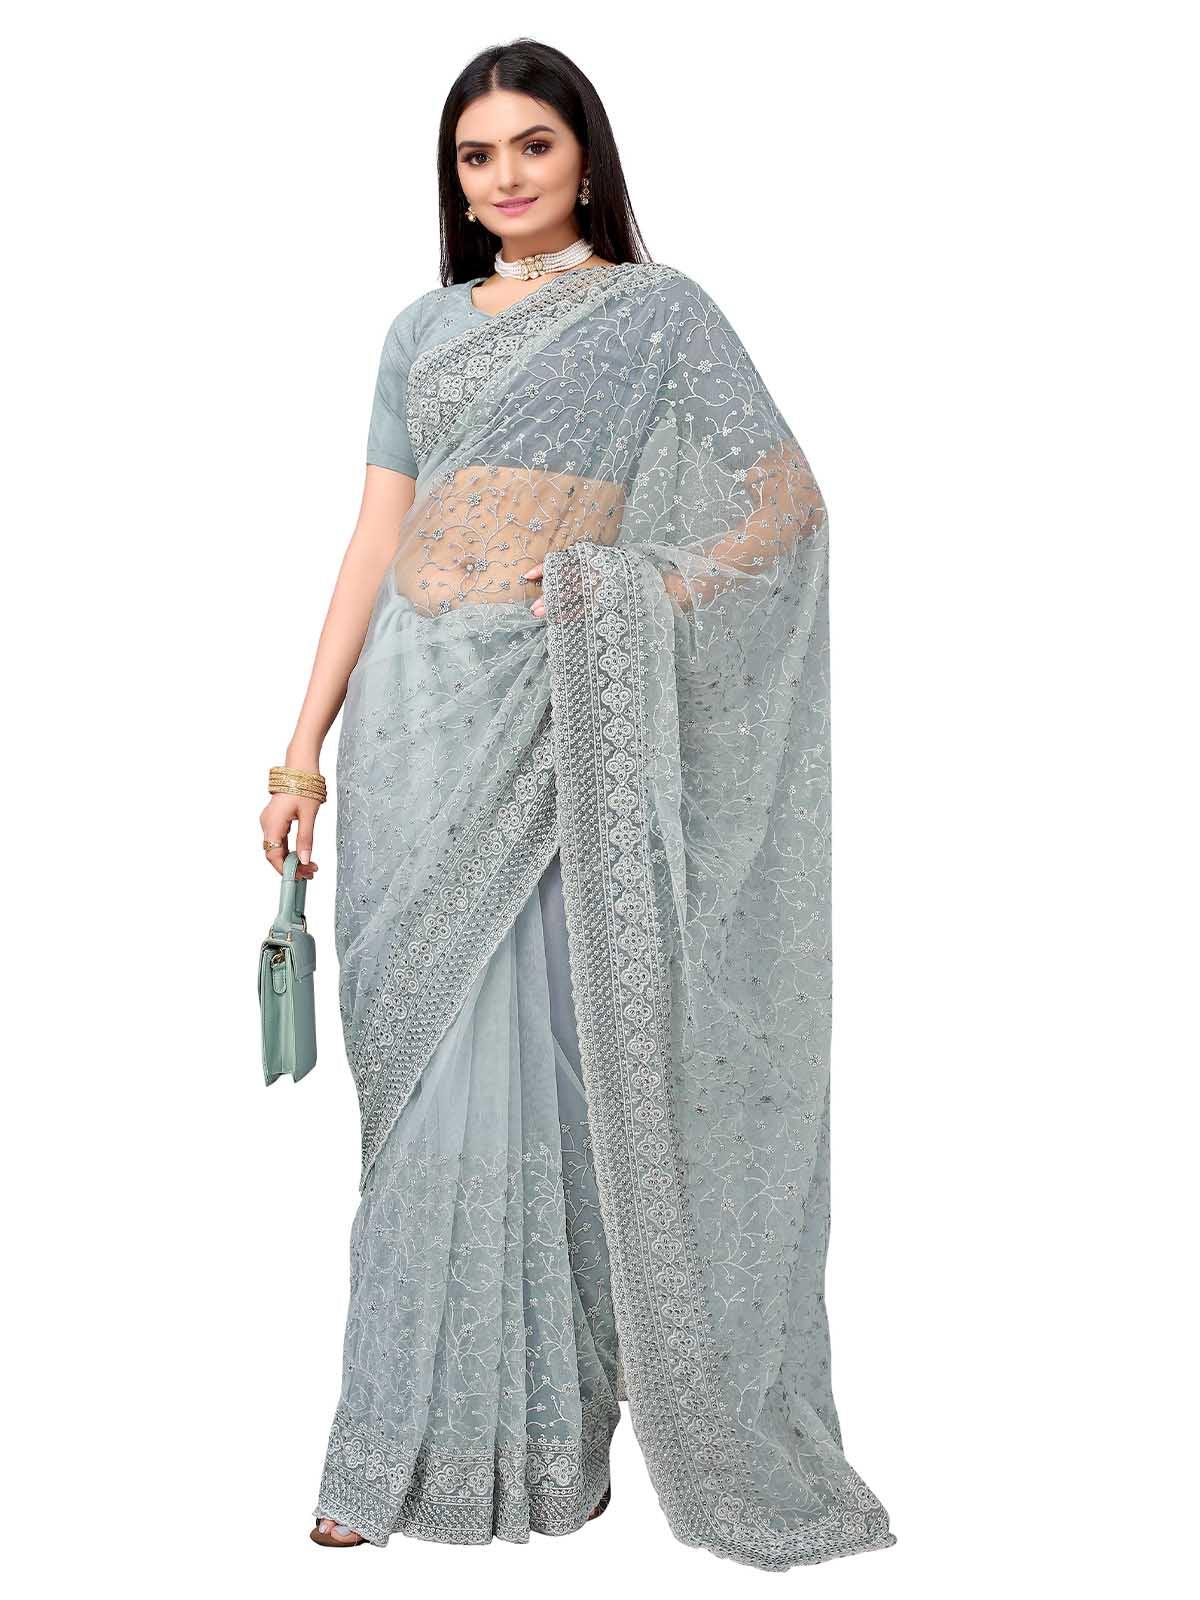 Women's Grey Net Embroidered Saree With Blouse - Odette